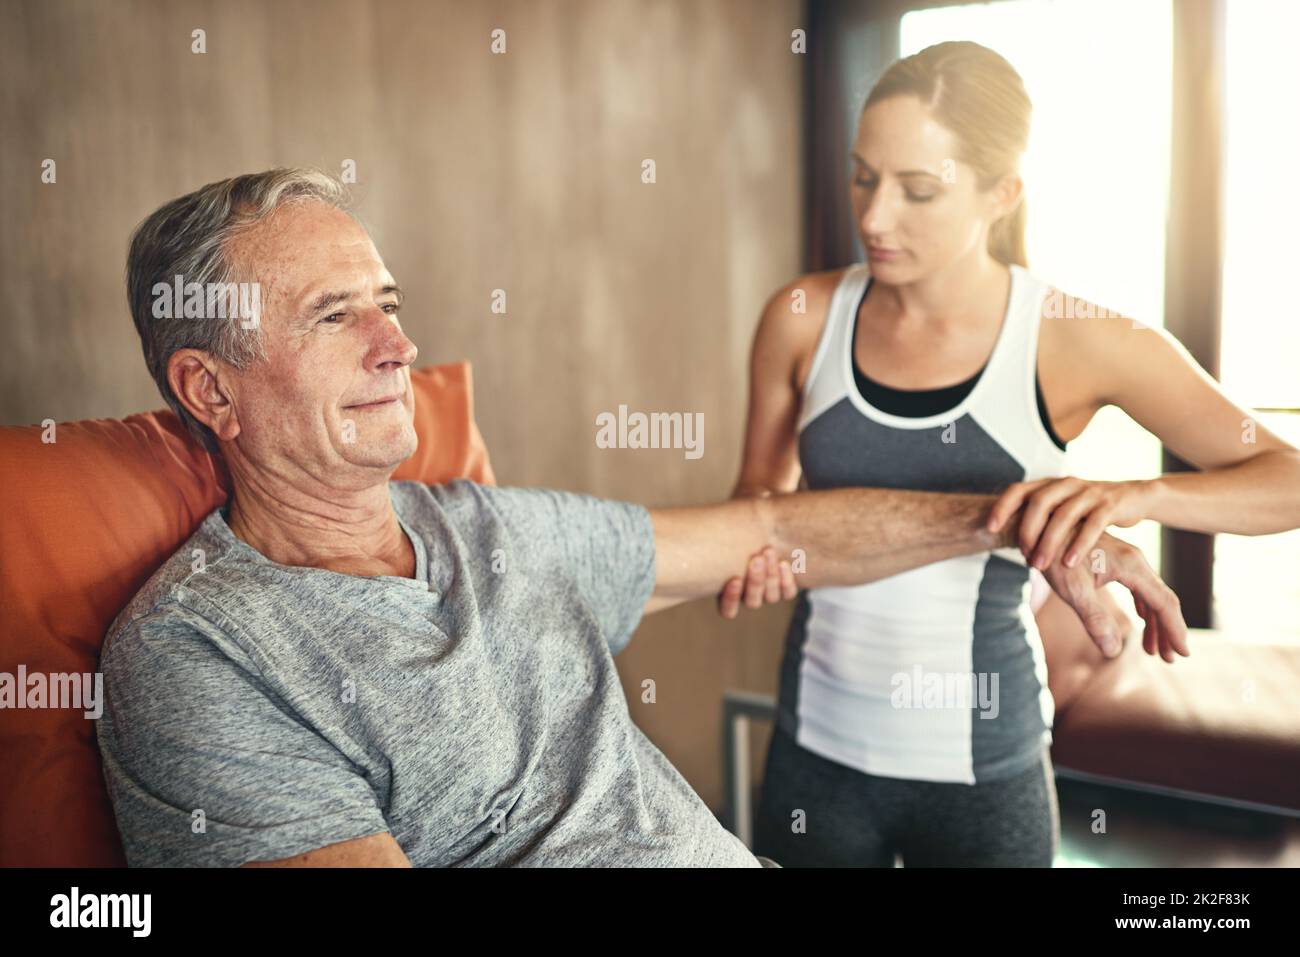 She has an aptitude for caring for others. Shot of a senior man being treated by a physiotherapist. Stock Photo